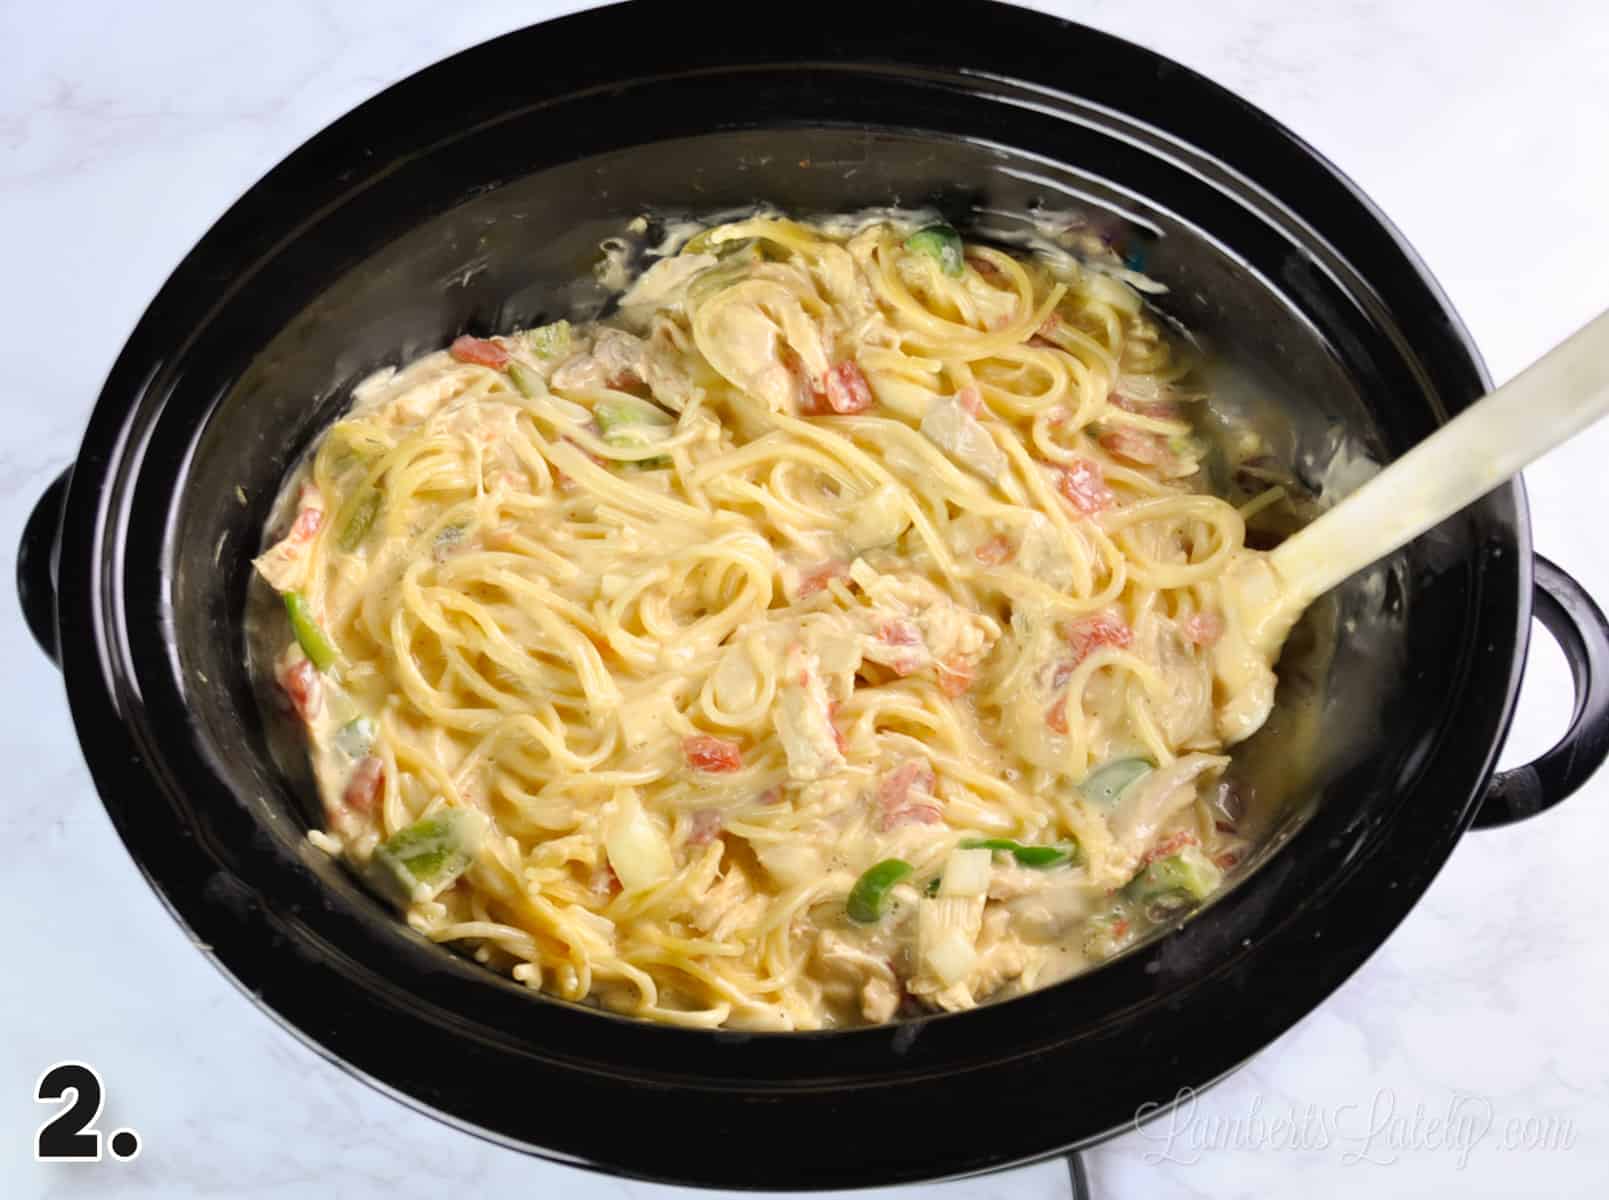 spaghetti noodles added to cheese sauce mixture in a crock pot.